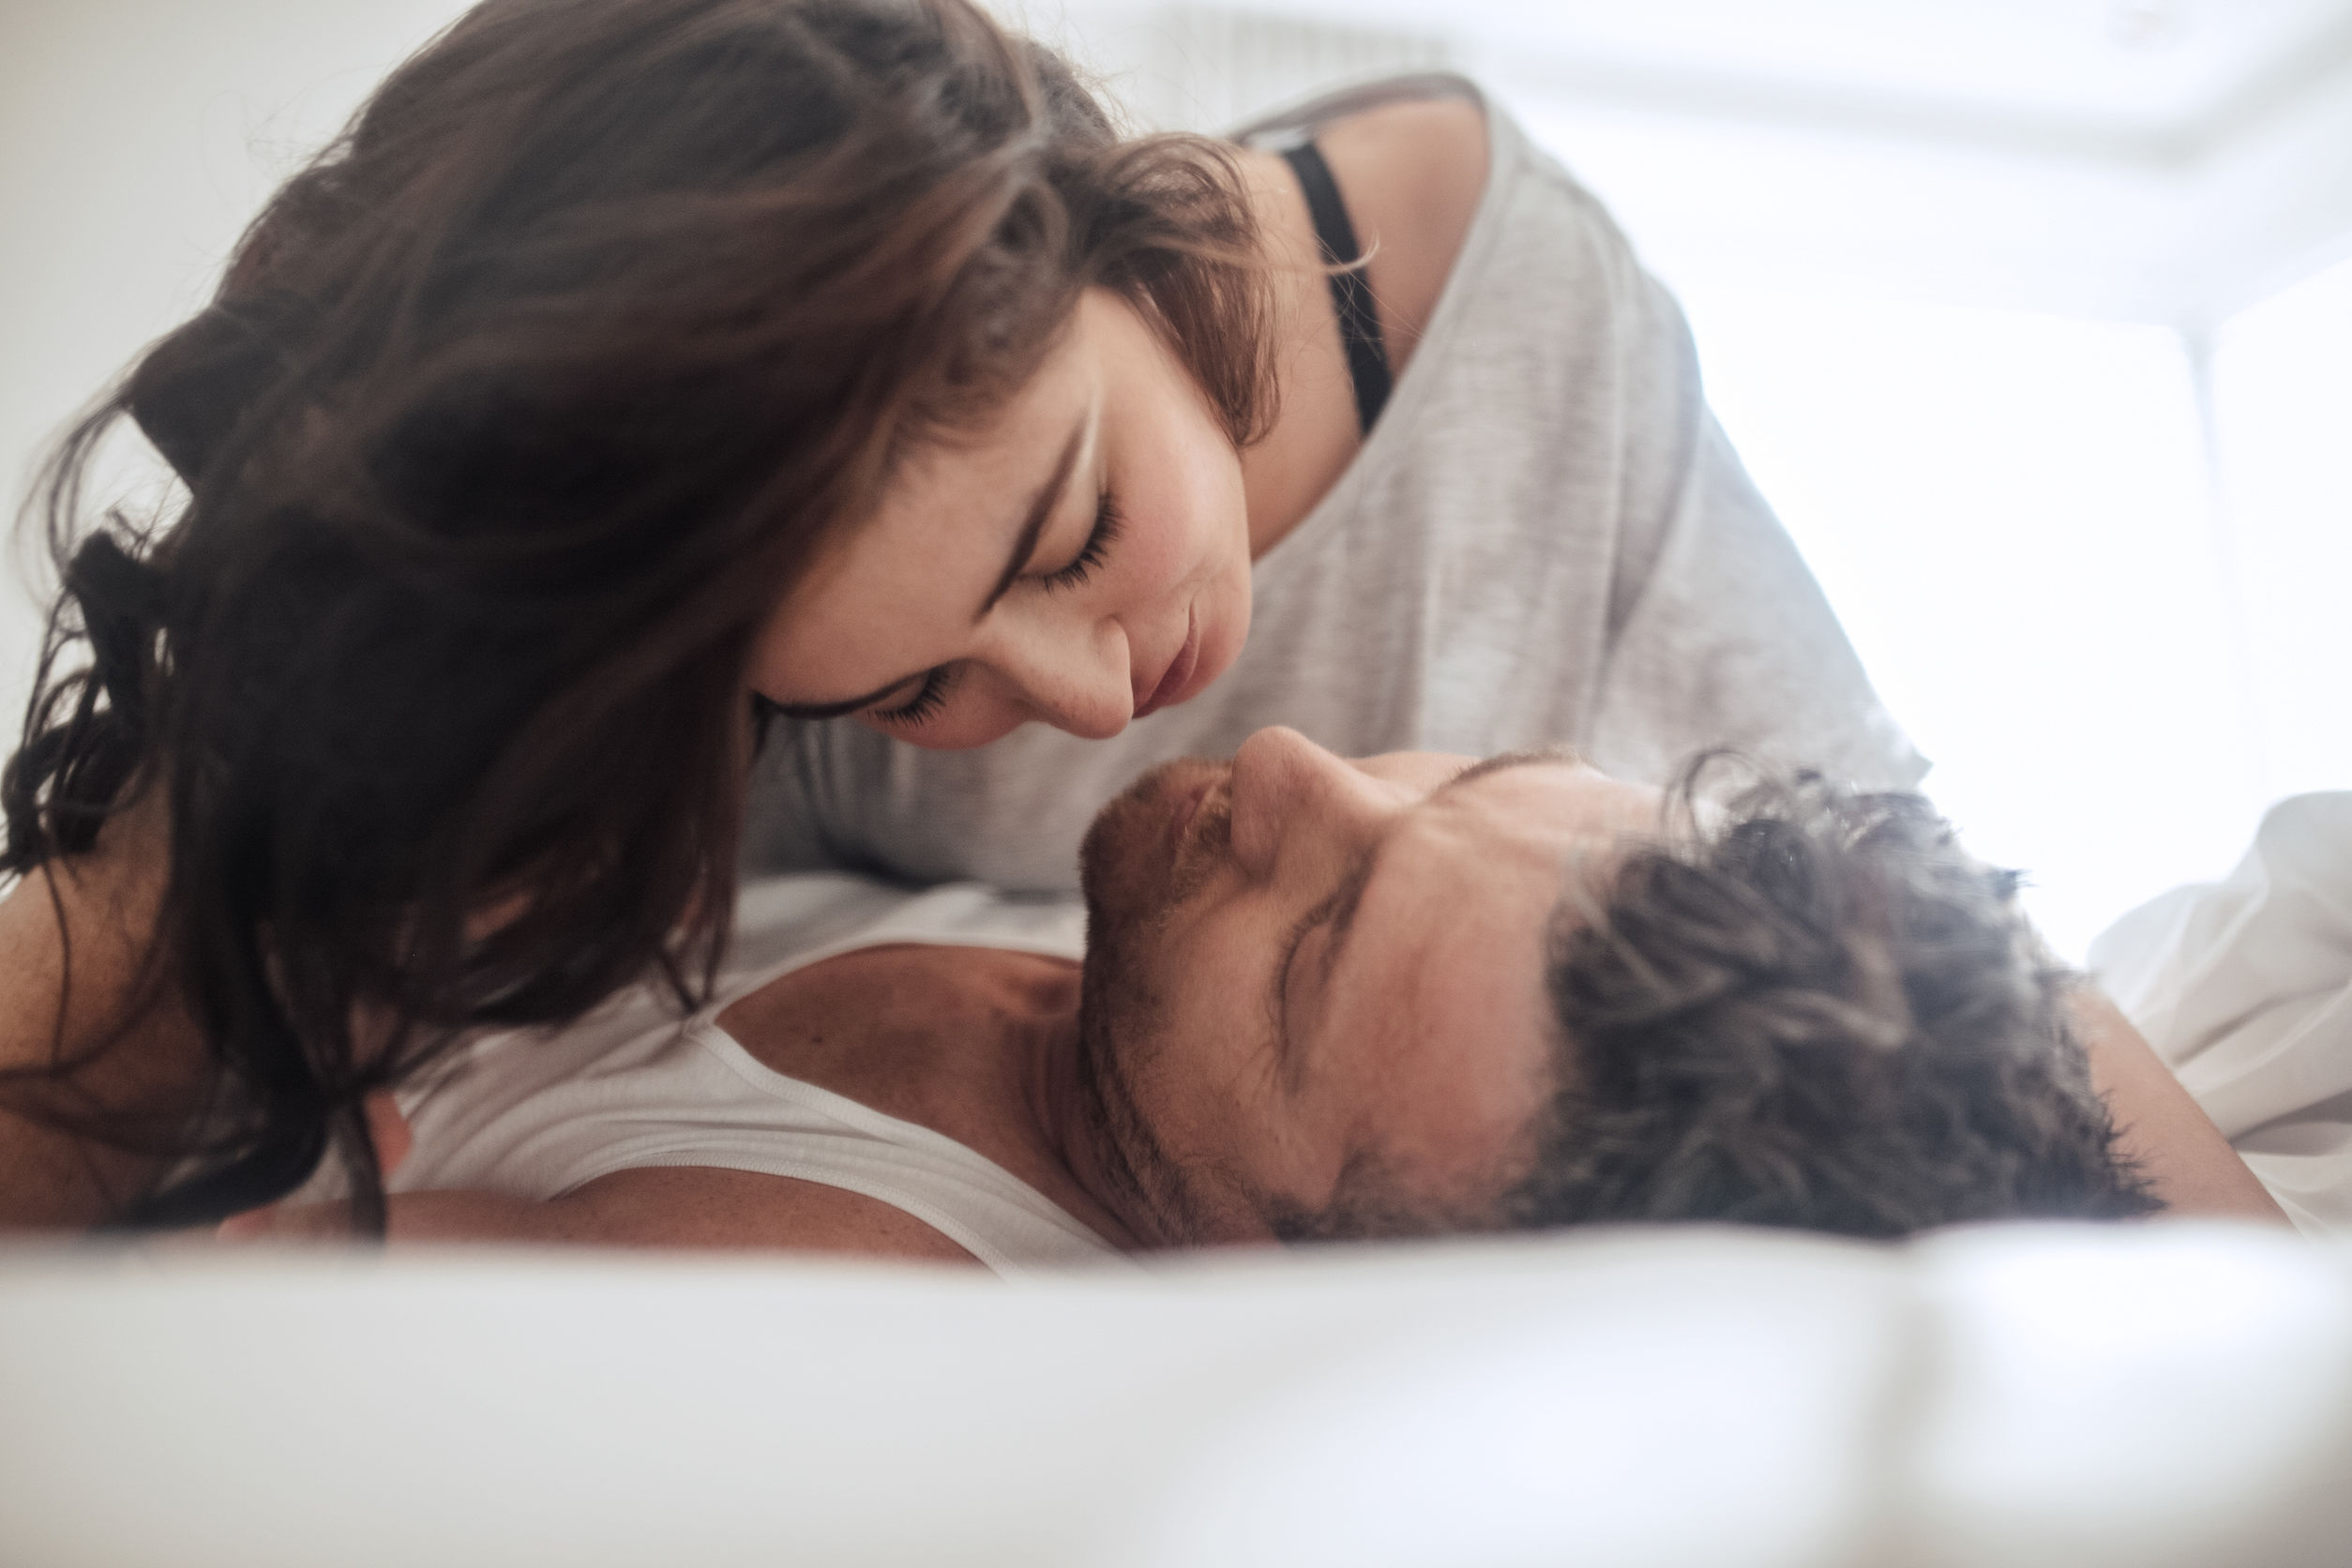 5 Reasons You Should Have WAY More Morning Sex, Backed by Science